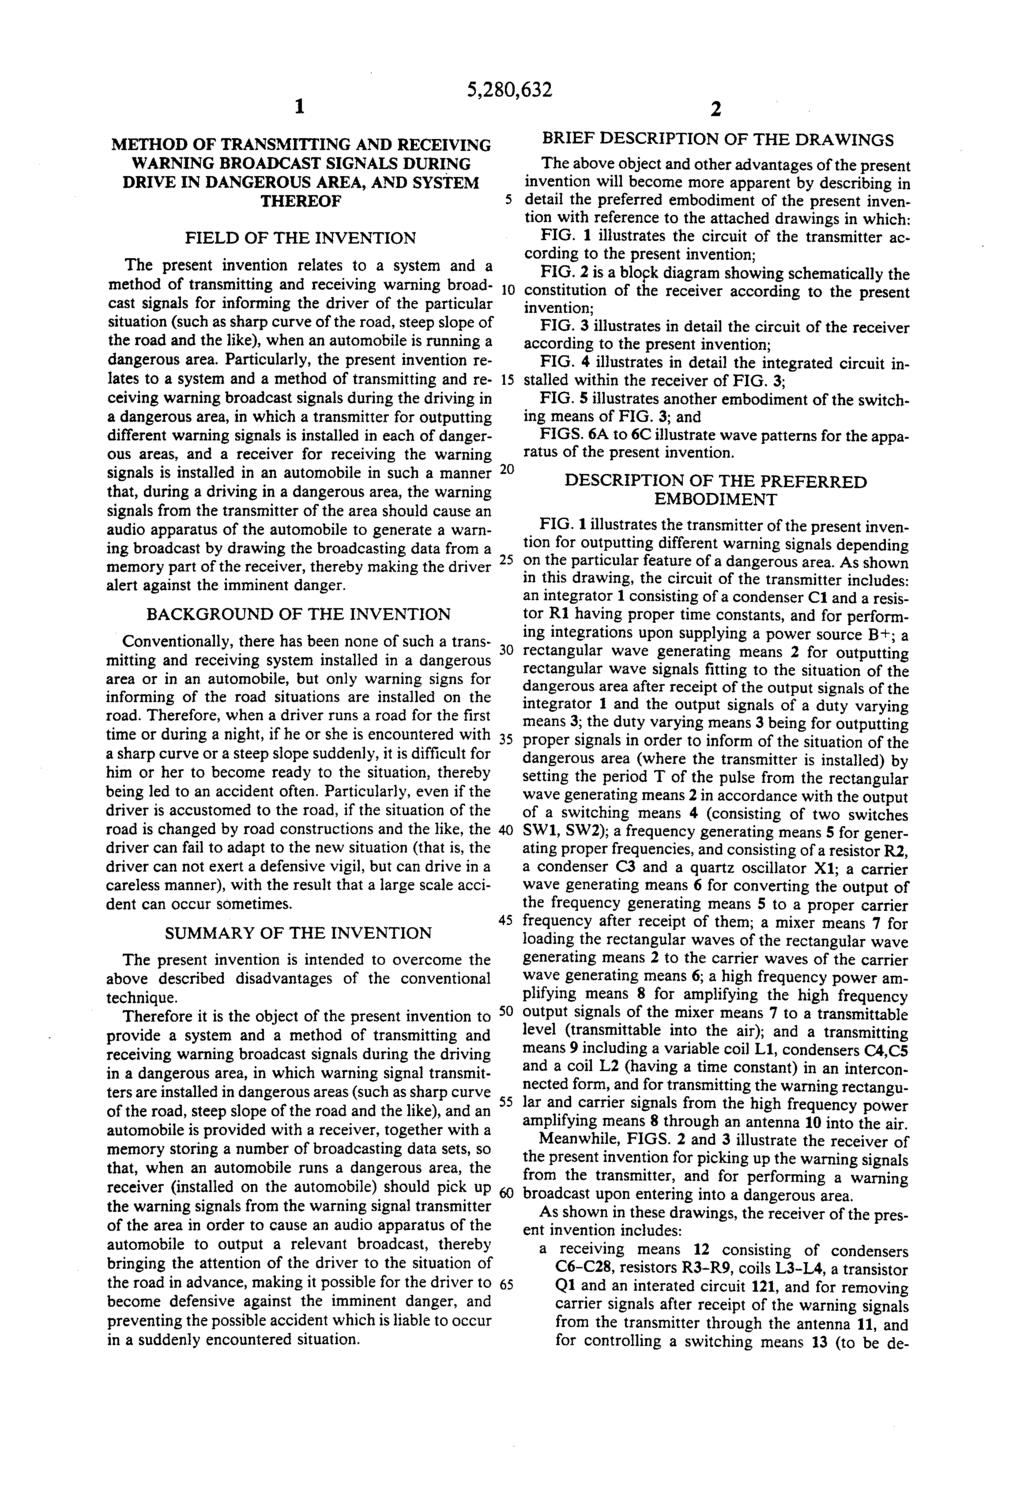 1 METHOD OF TRANSMITTING AND RECEIVING WARNING BROADCAST SIGNALS DURING DRIVE IN DANGEROUS AREA, AND SYSTEM THEREOF FIELD OF THE INVENTION The present invention relates to a system and a method of